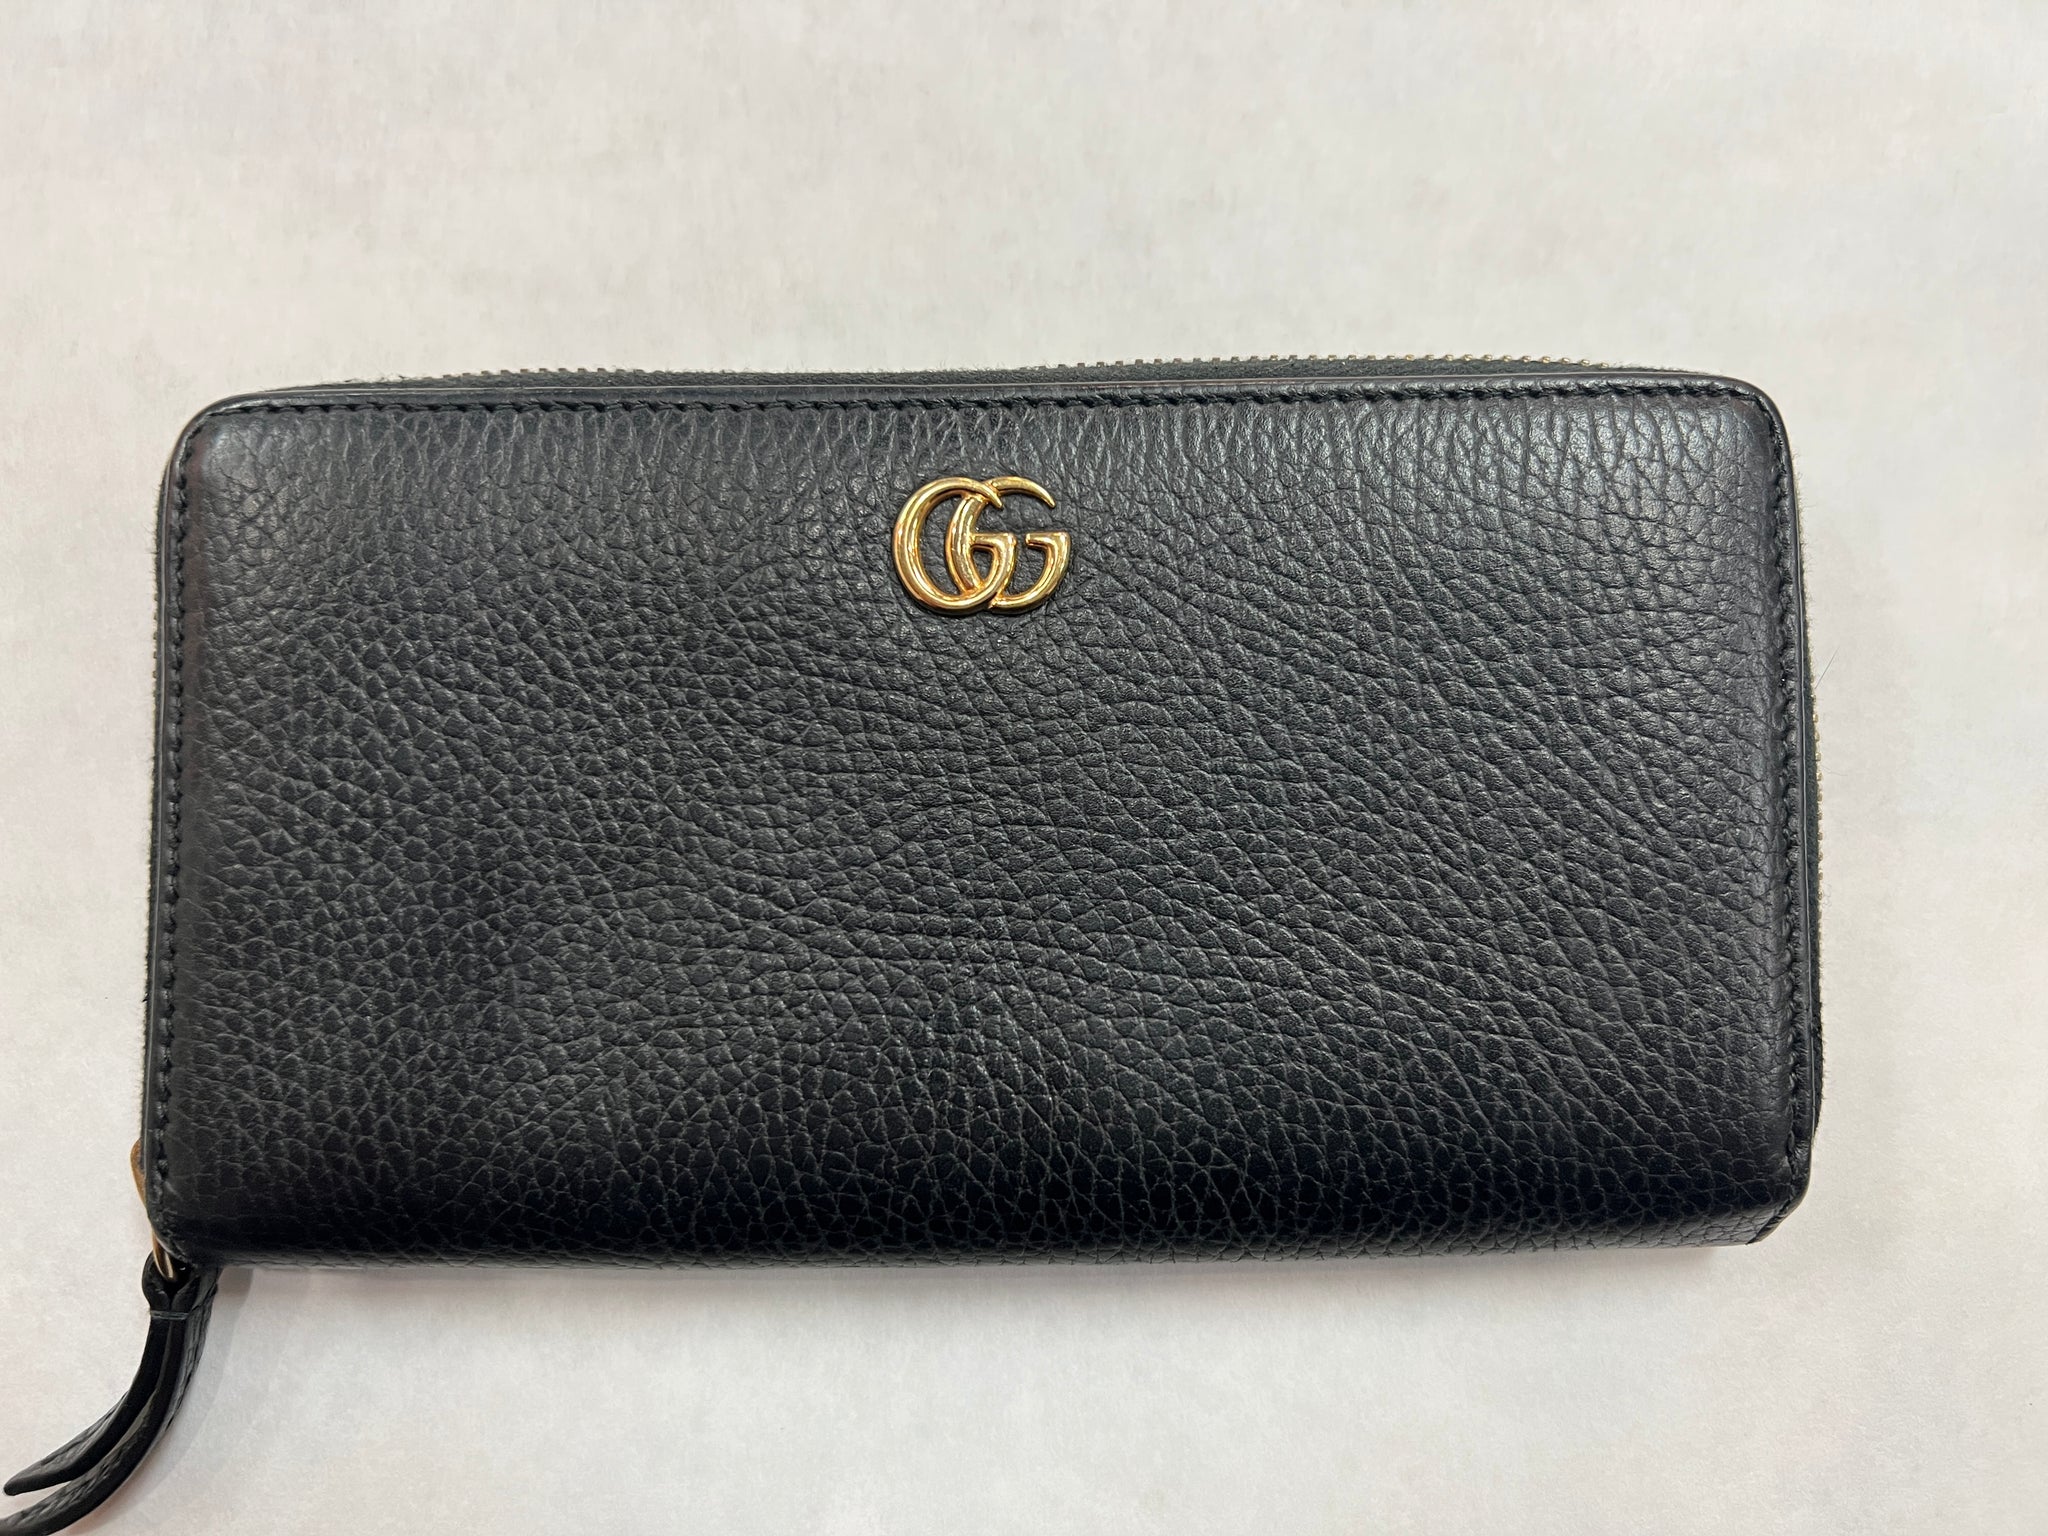 blæse hul Meddele Smadre Authentic Gucci Black Leather Zip Around Wallet – Relics to Rhinestones